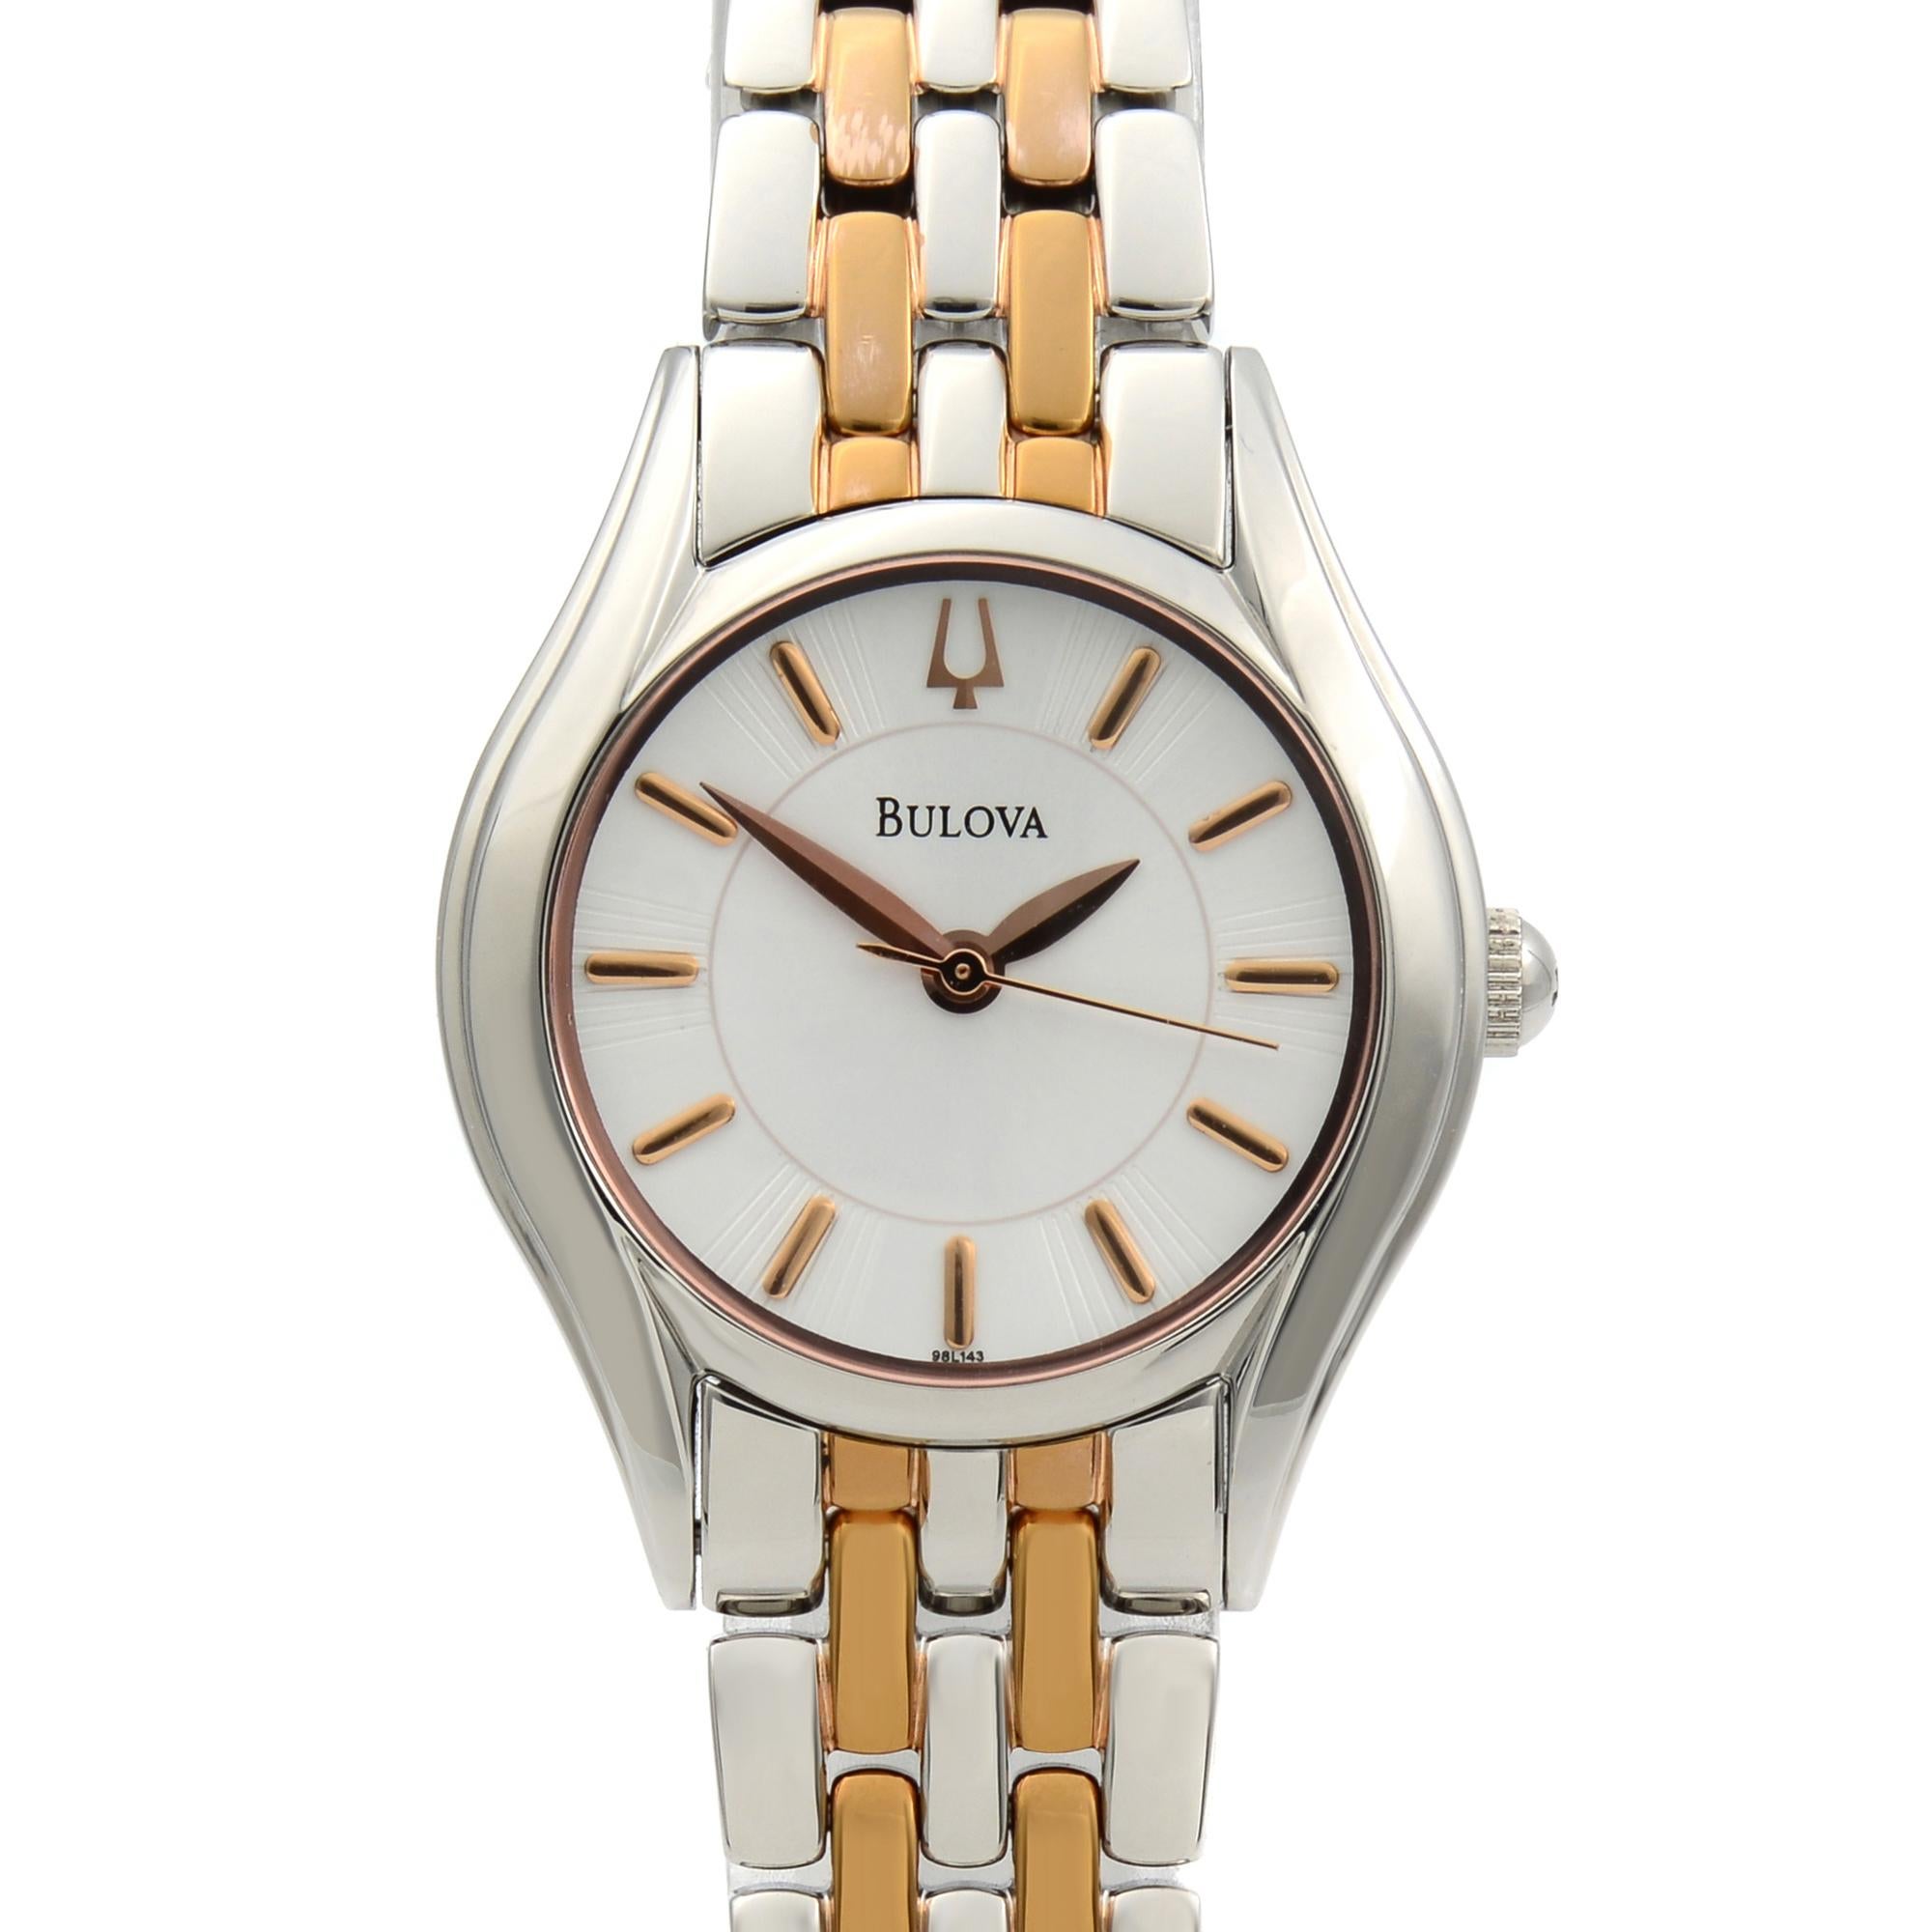 Pre-owned Bulova Essentials Silver Sticks Dial Two Tone Steel Quartz Ladies Watch. Micro Scratches on the Rose Gold-Tone Bracelet, This Beautiful Timepiece is Powered by a Quartz (Battery) Movement and Features: Stainless Steel Case with a Two-Tone